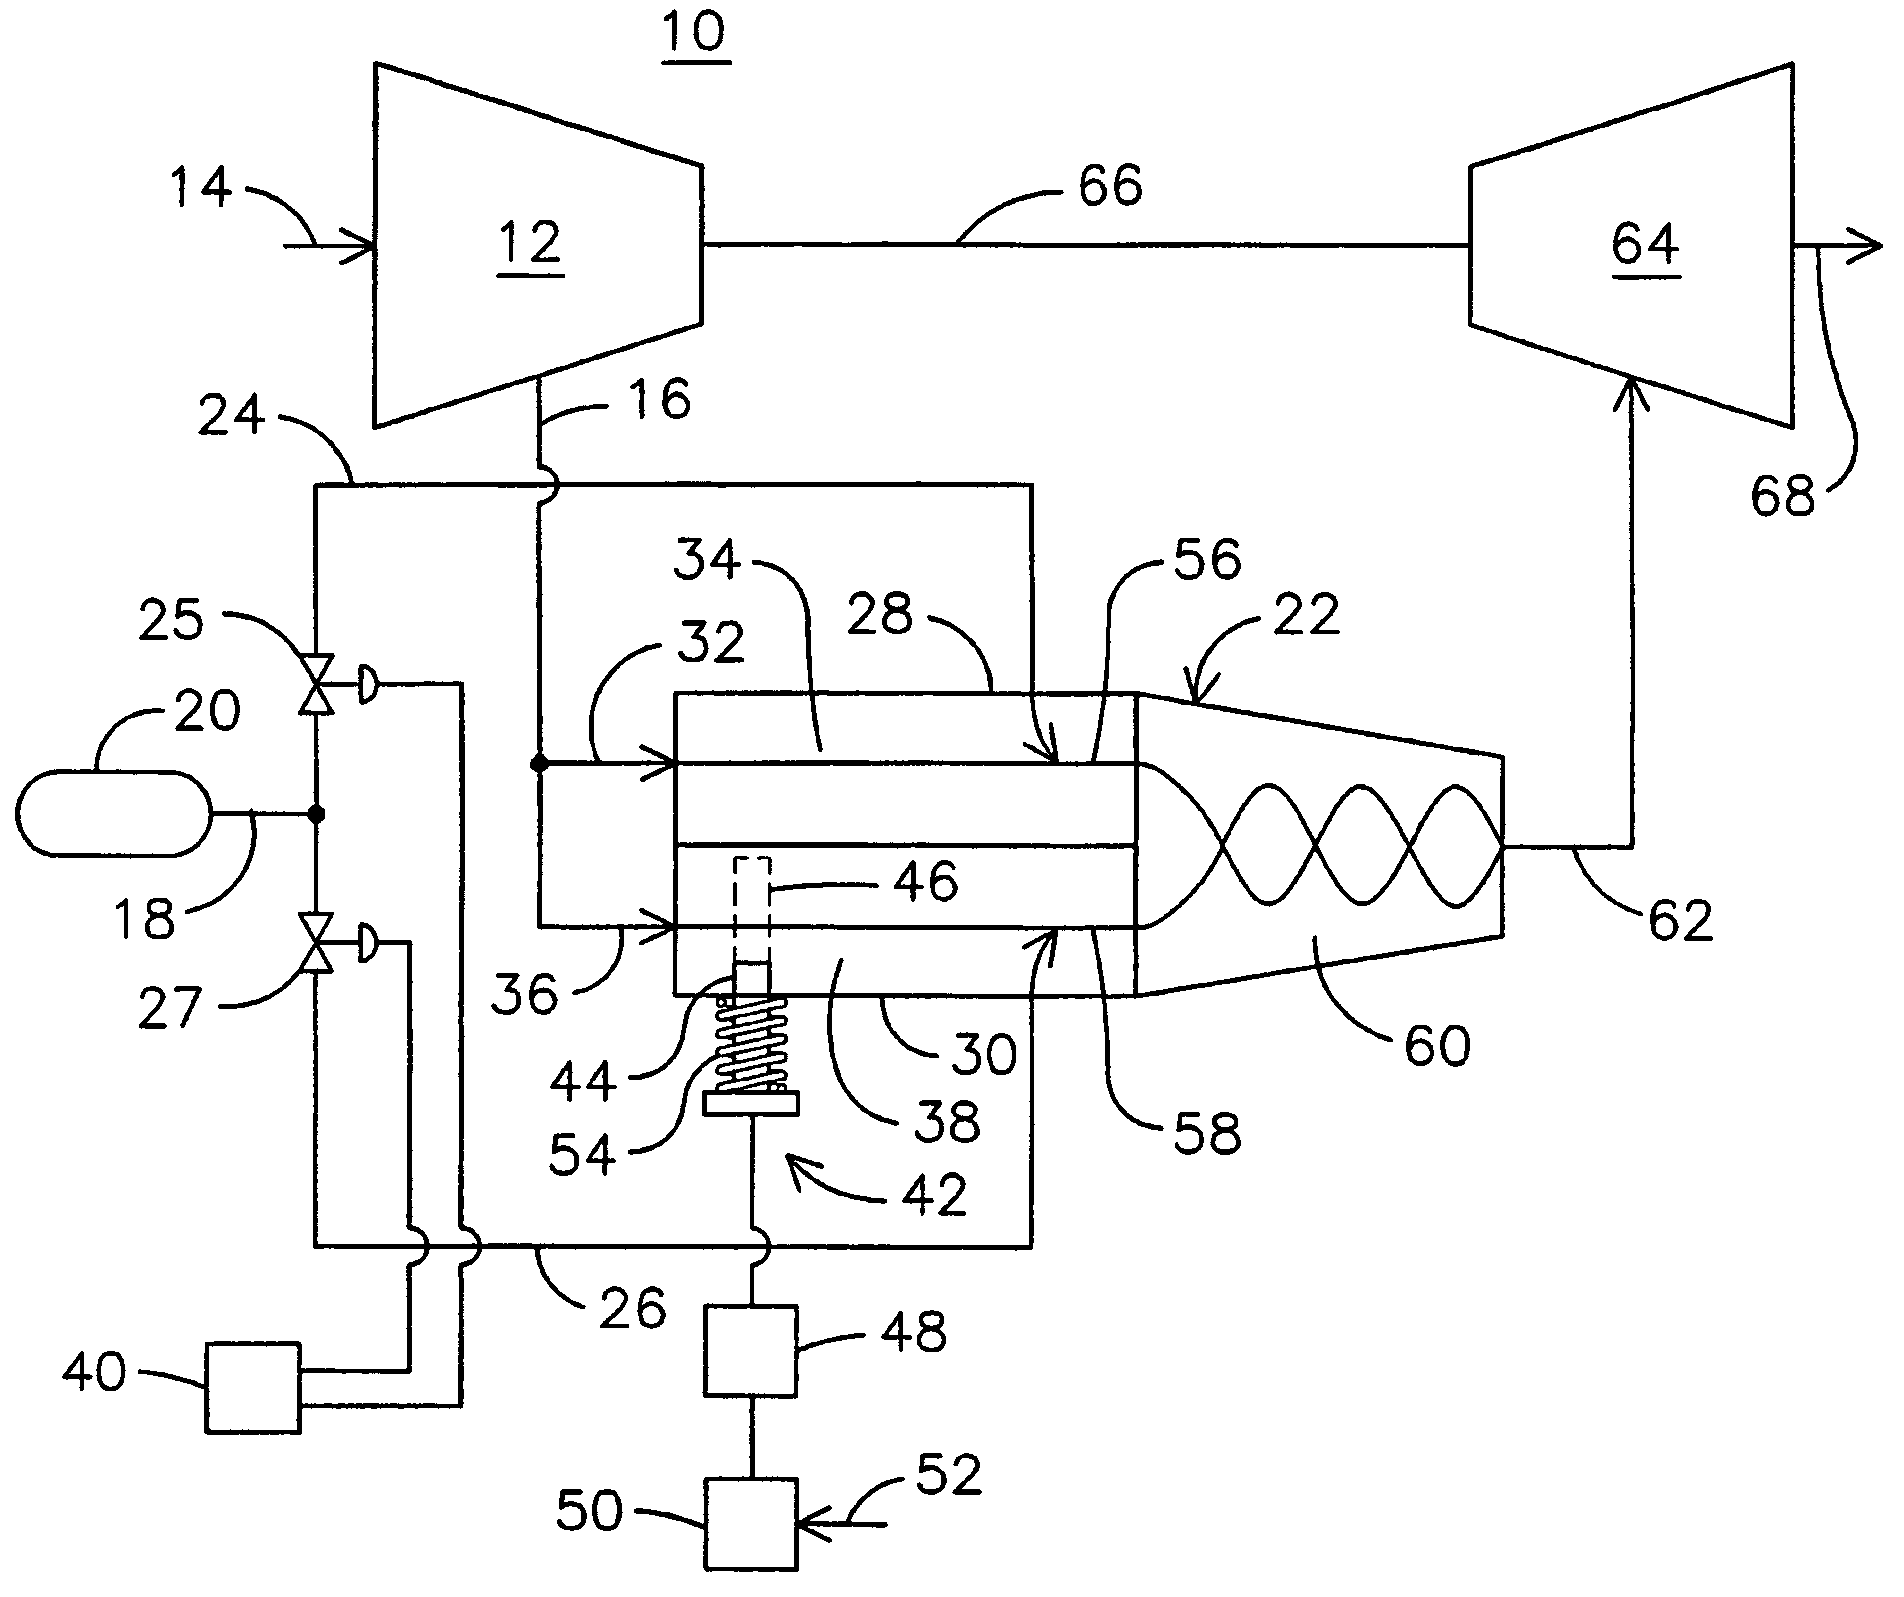 Controlled pilot oxidizer for a gas turbine combustor